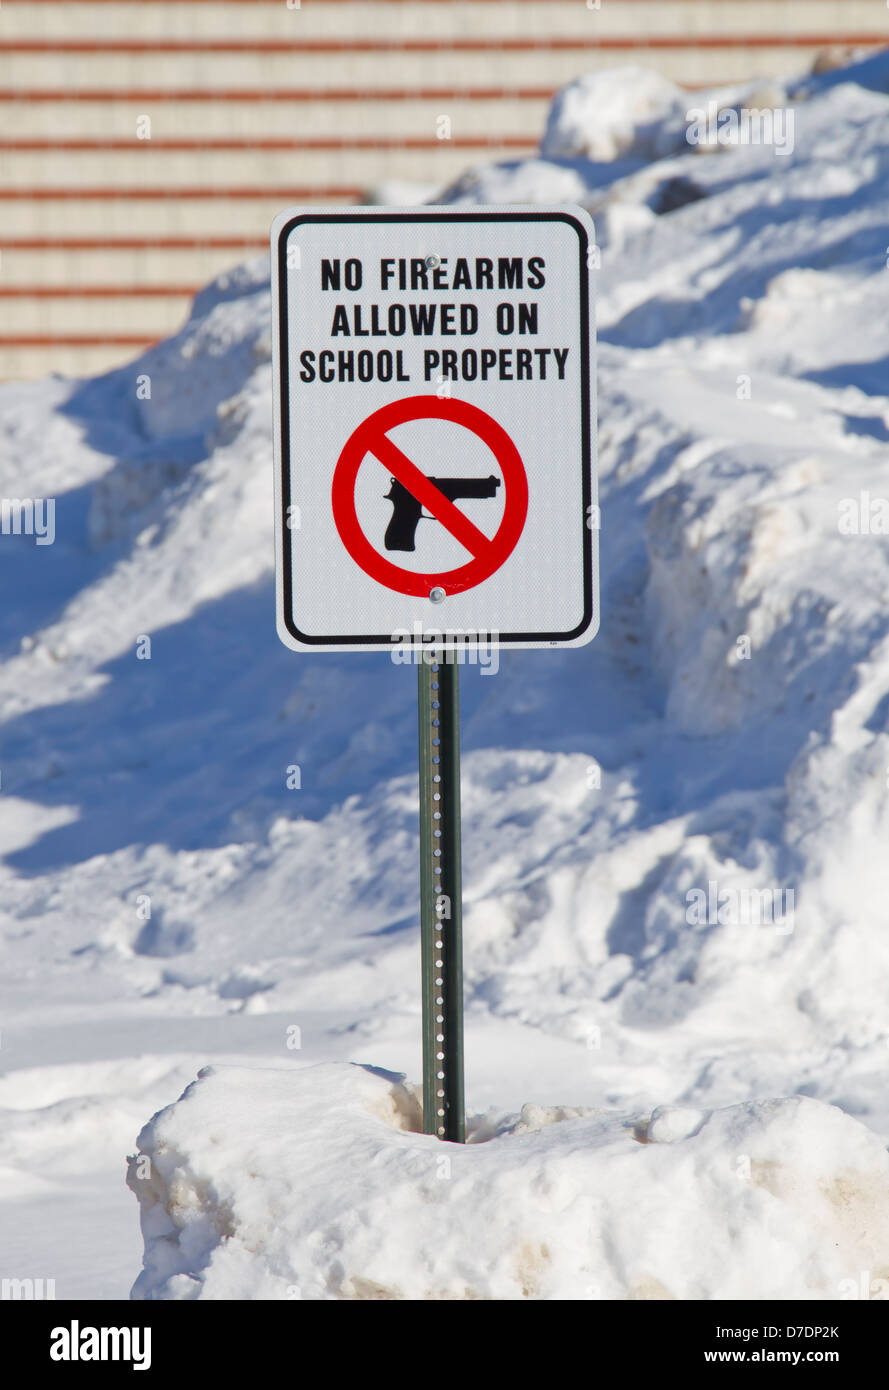 Full View of No Firearms Allowed on School Property Sign outside a school in the snow. Stock Photo